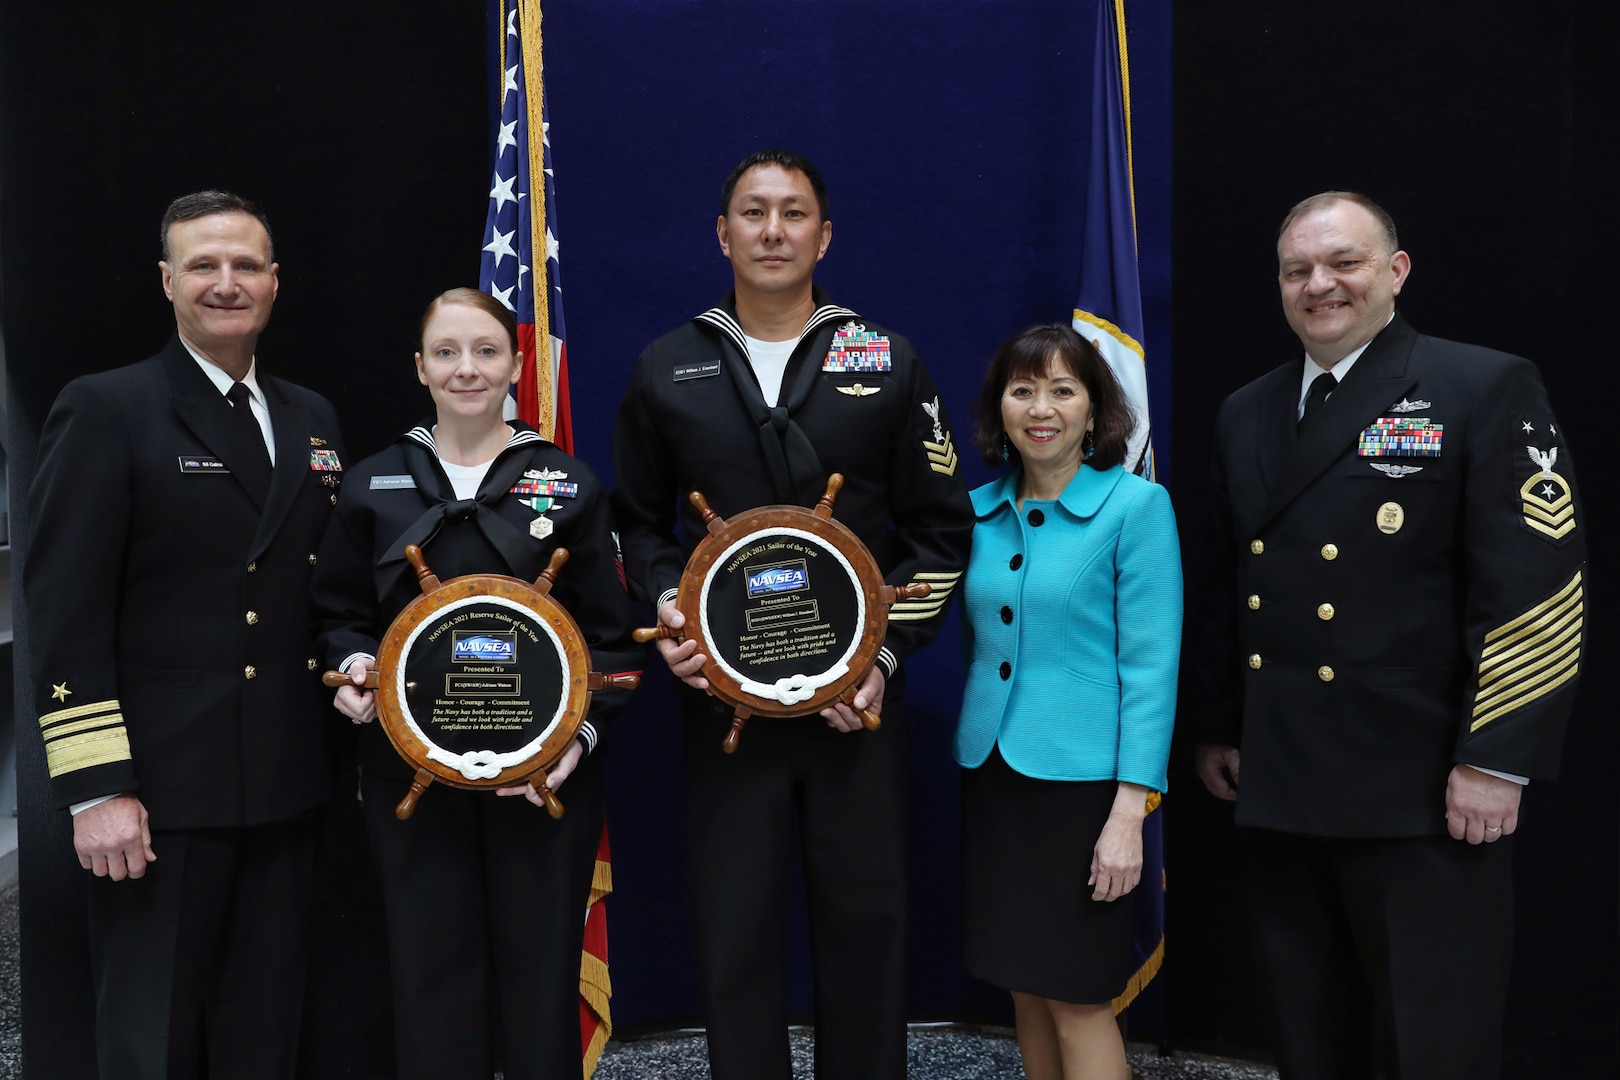 NAVSEA, present the 2021 NAVSEA Sailor of the Year Award to FC1(SW/AW) Adriane Watson, Navy Region Mid-Atlantic (CNRMA) of SUBSHIP in Newport News, VA and Reservist EOD1 (EWS/EXW) William J. Eisenhart, Naval Surface Warfare Center, Expeditionary Medical Facility, Bethesda, MD, in a ceremony at the Washington Navy Yard.